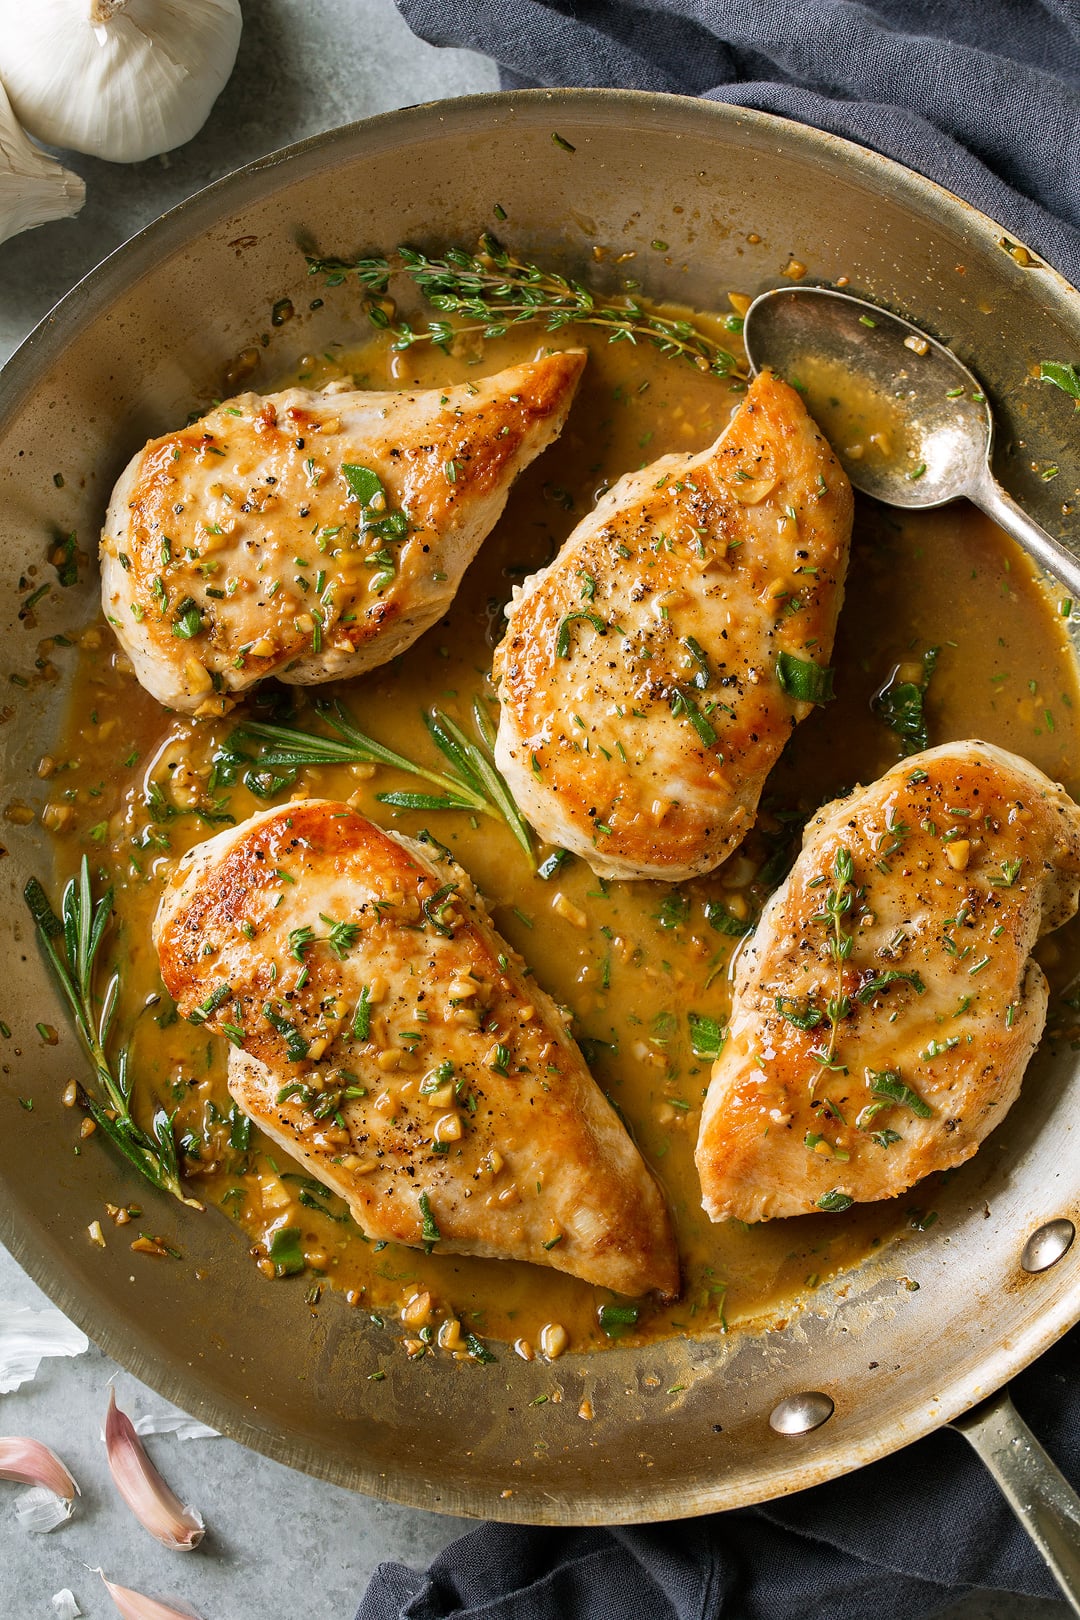 Skillet Chicken Recipe With Garlic Herb Butter Sauce Cooking Classy,Queen Size Mattress Dimensions In Inches